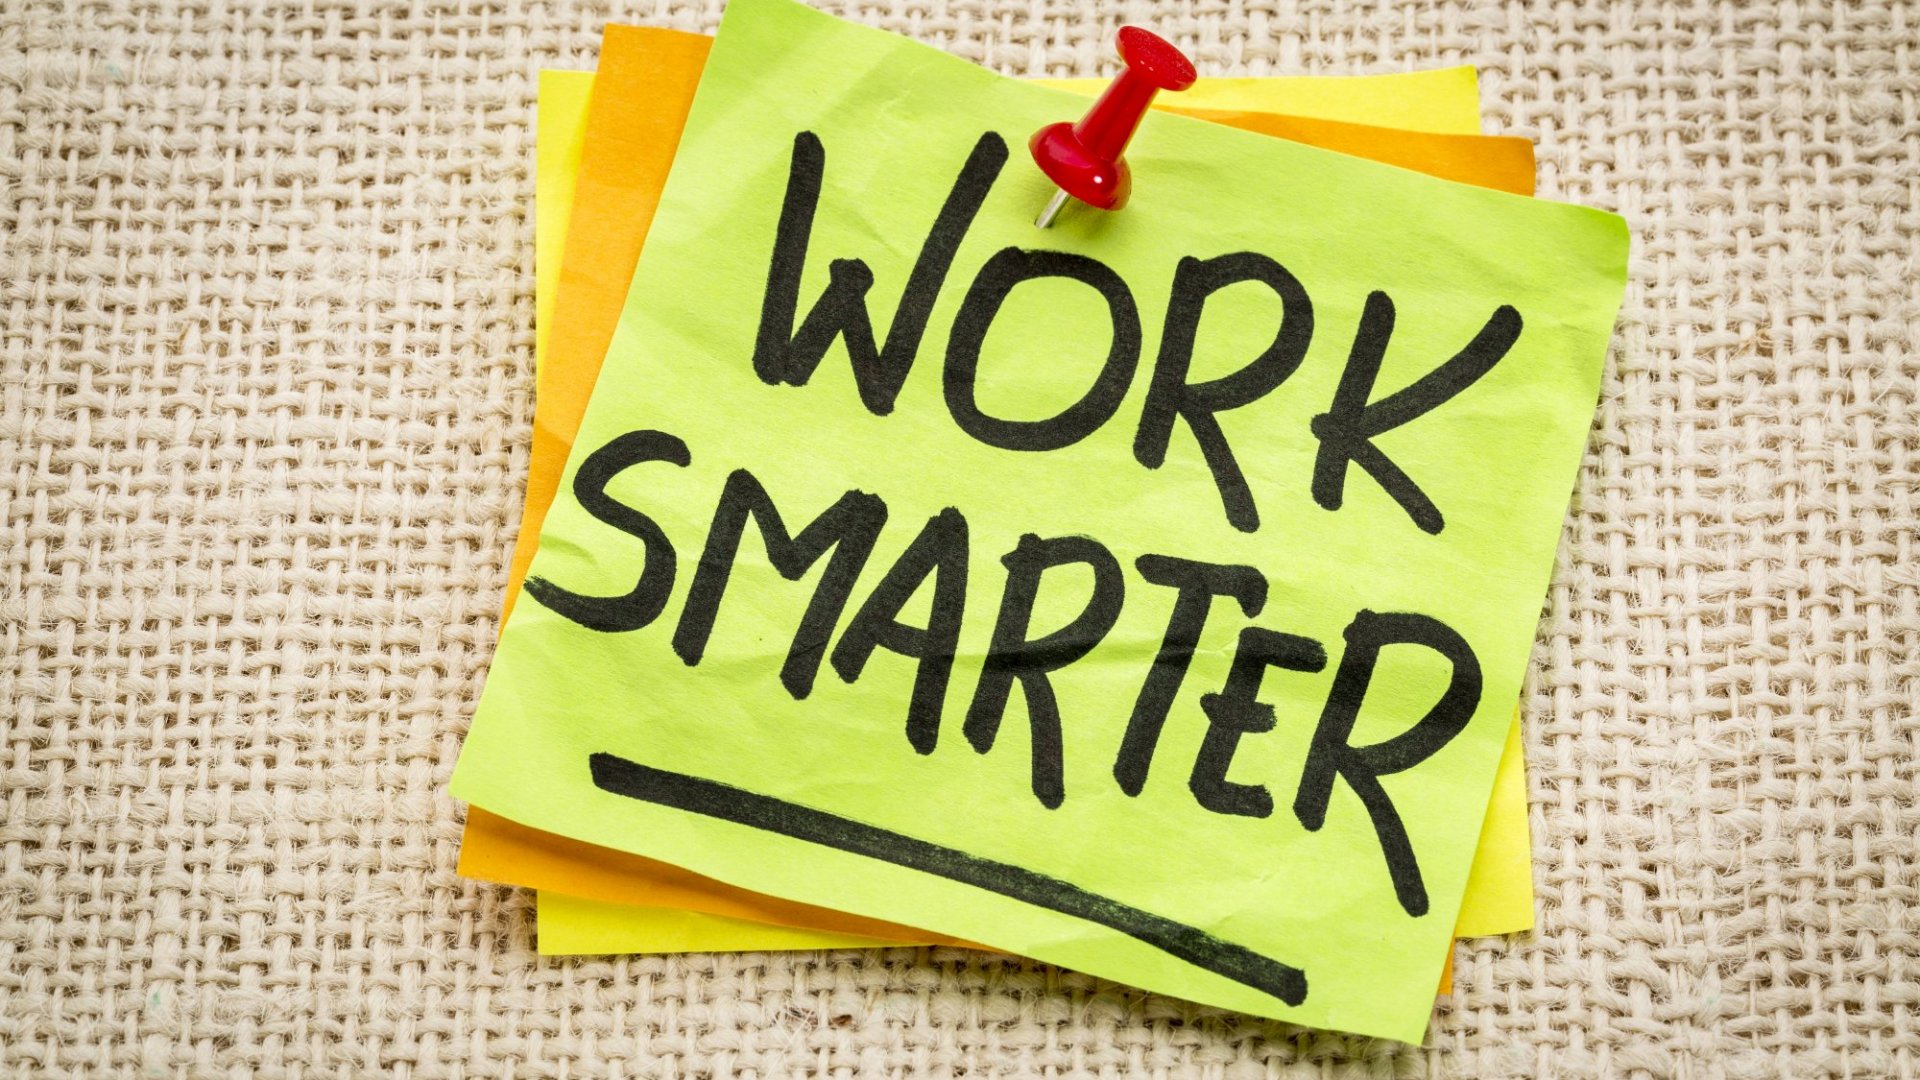 Working Smarter - Using Technology to your Advantage